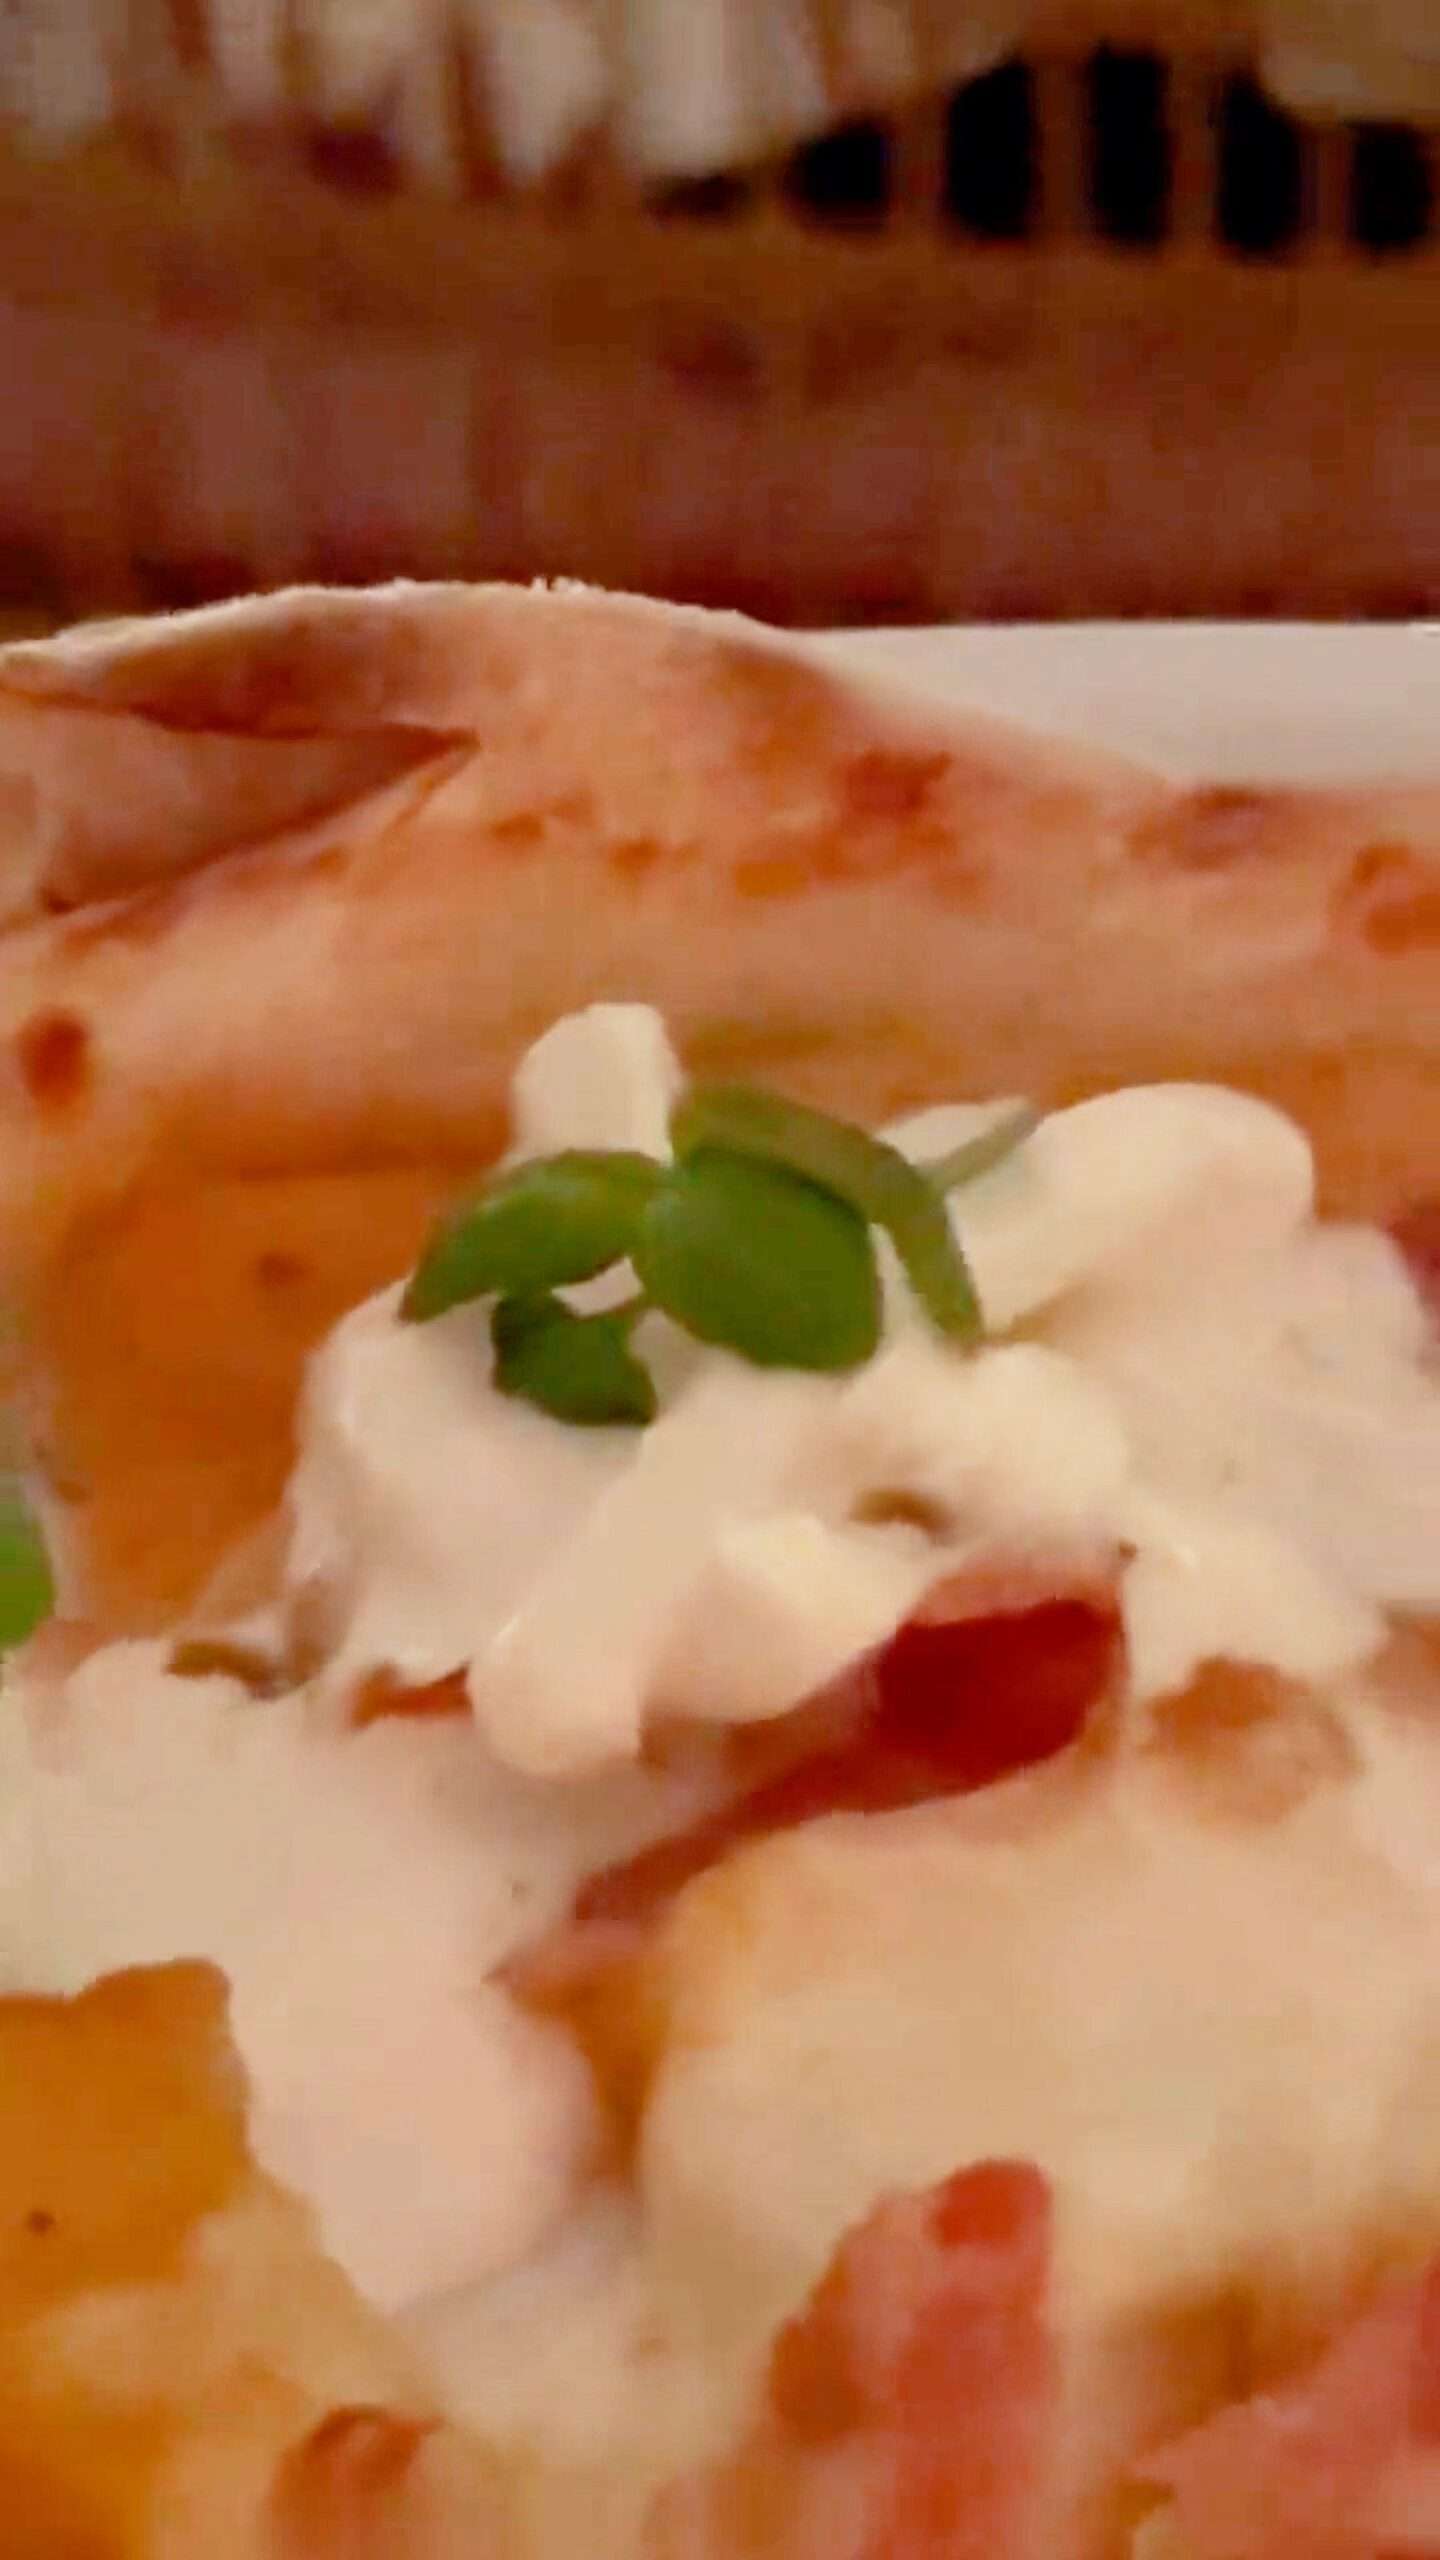 Read more about the article Shocked Diner Finds Live Caterpillar In His Pizza At Top Footballer’s Restaurant